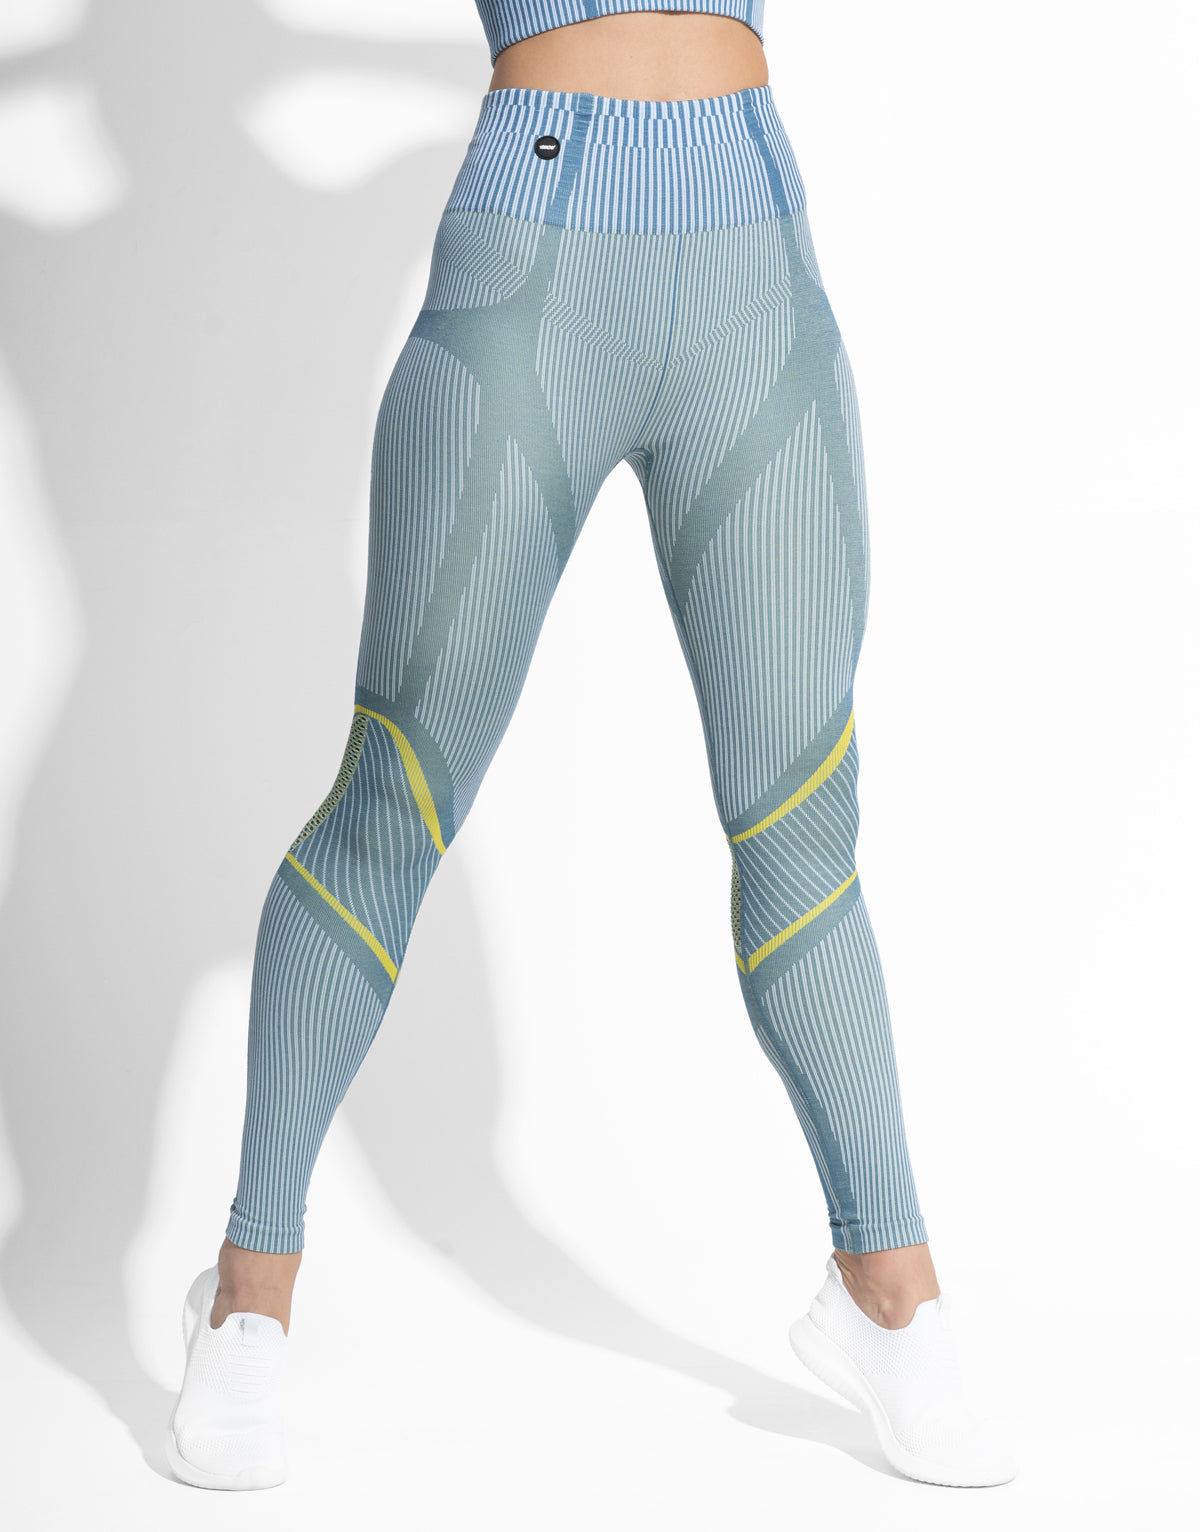 SPACE TEAL SEAMLESS